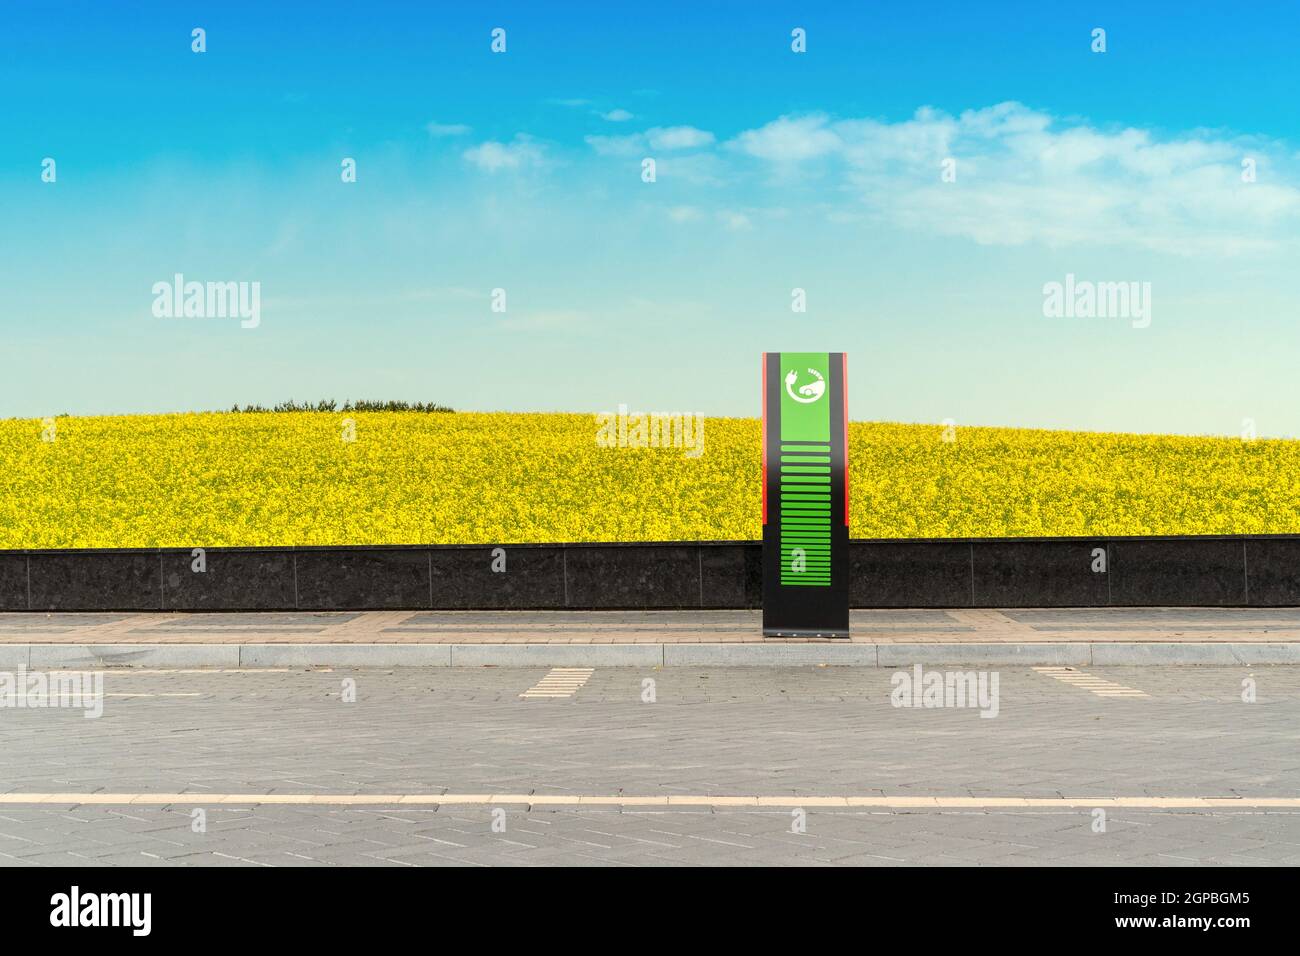 Electric car charging station with landscape background. Ecology and environment Stock Photo